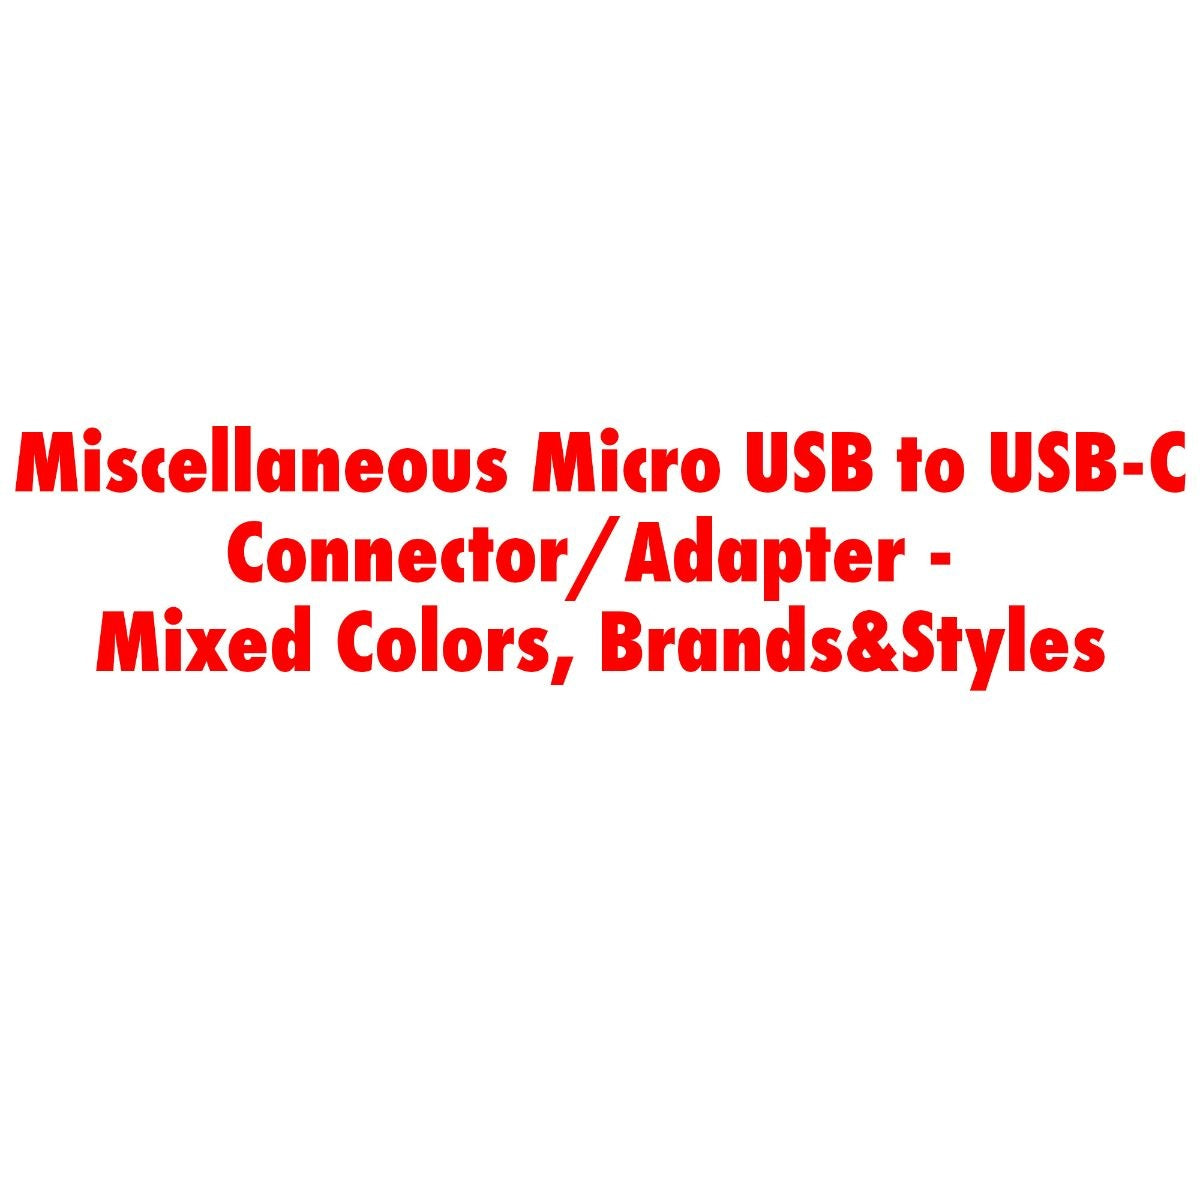 Miscellaneous Micro USB to USB-C Connector/Adapter -Mixed Colors, Brands&Styles